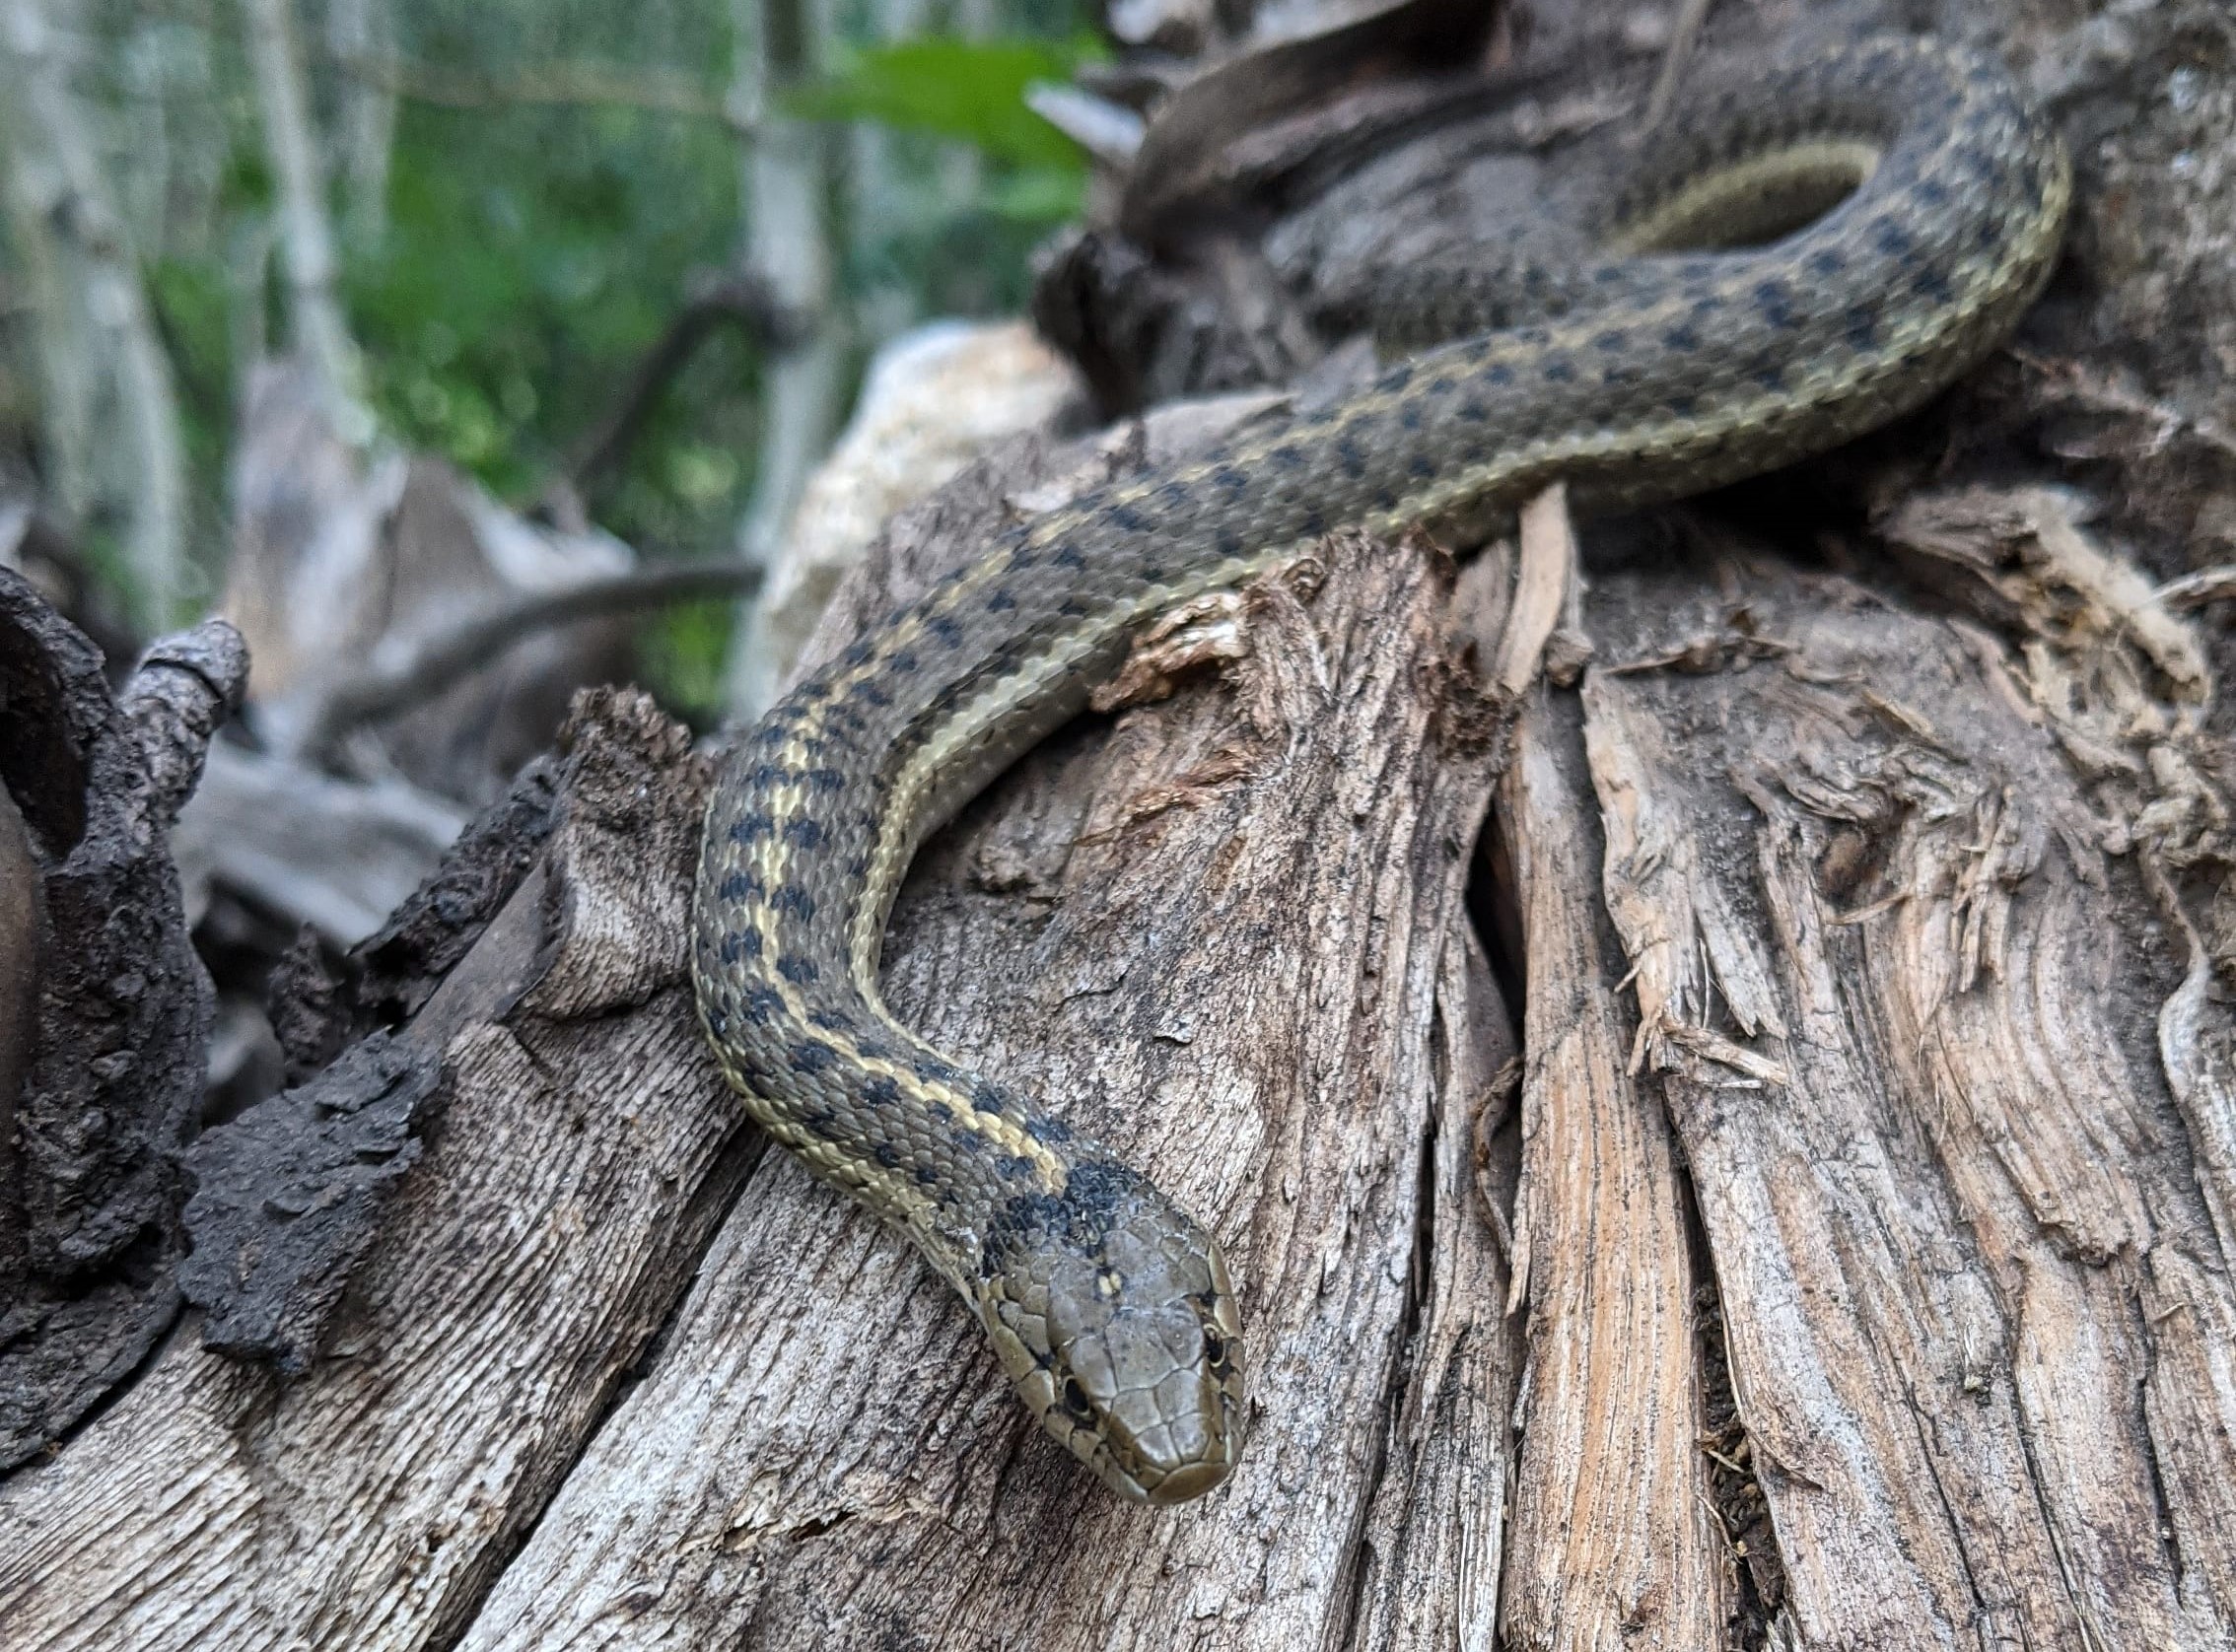 A wandering gartersnake sunning itself on a log next to the trail to Gloria Falls.